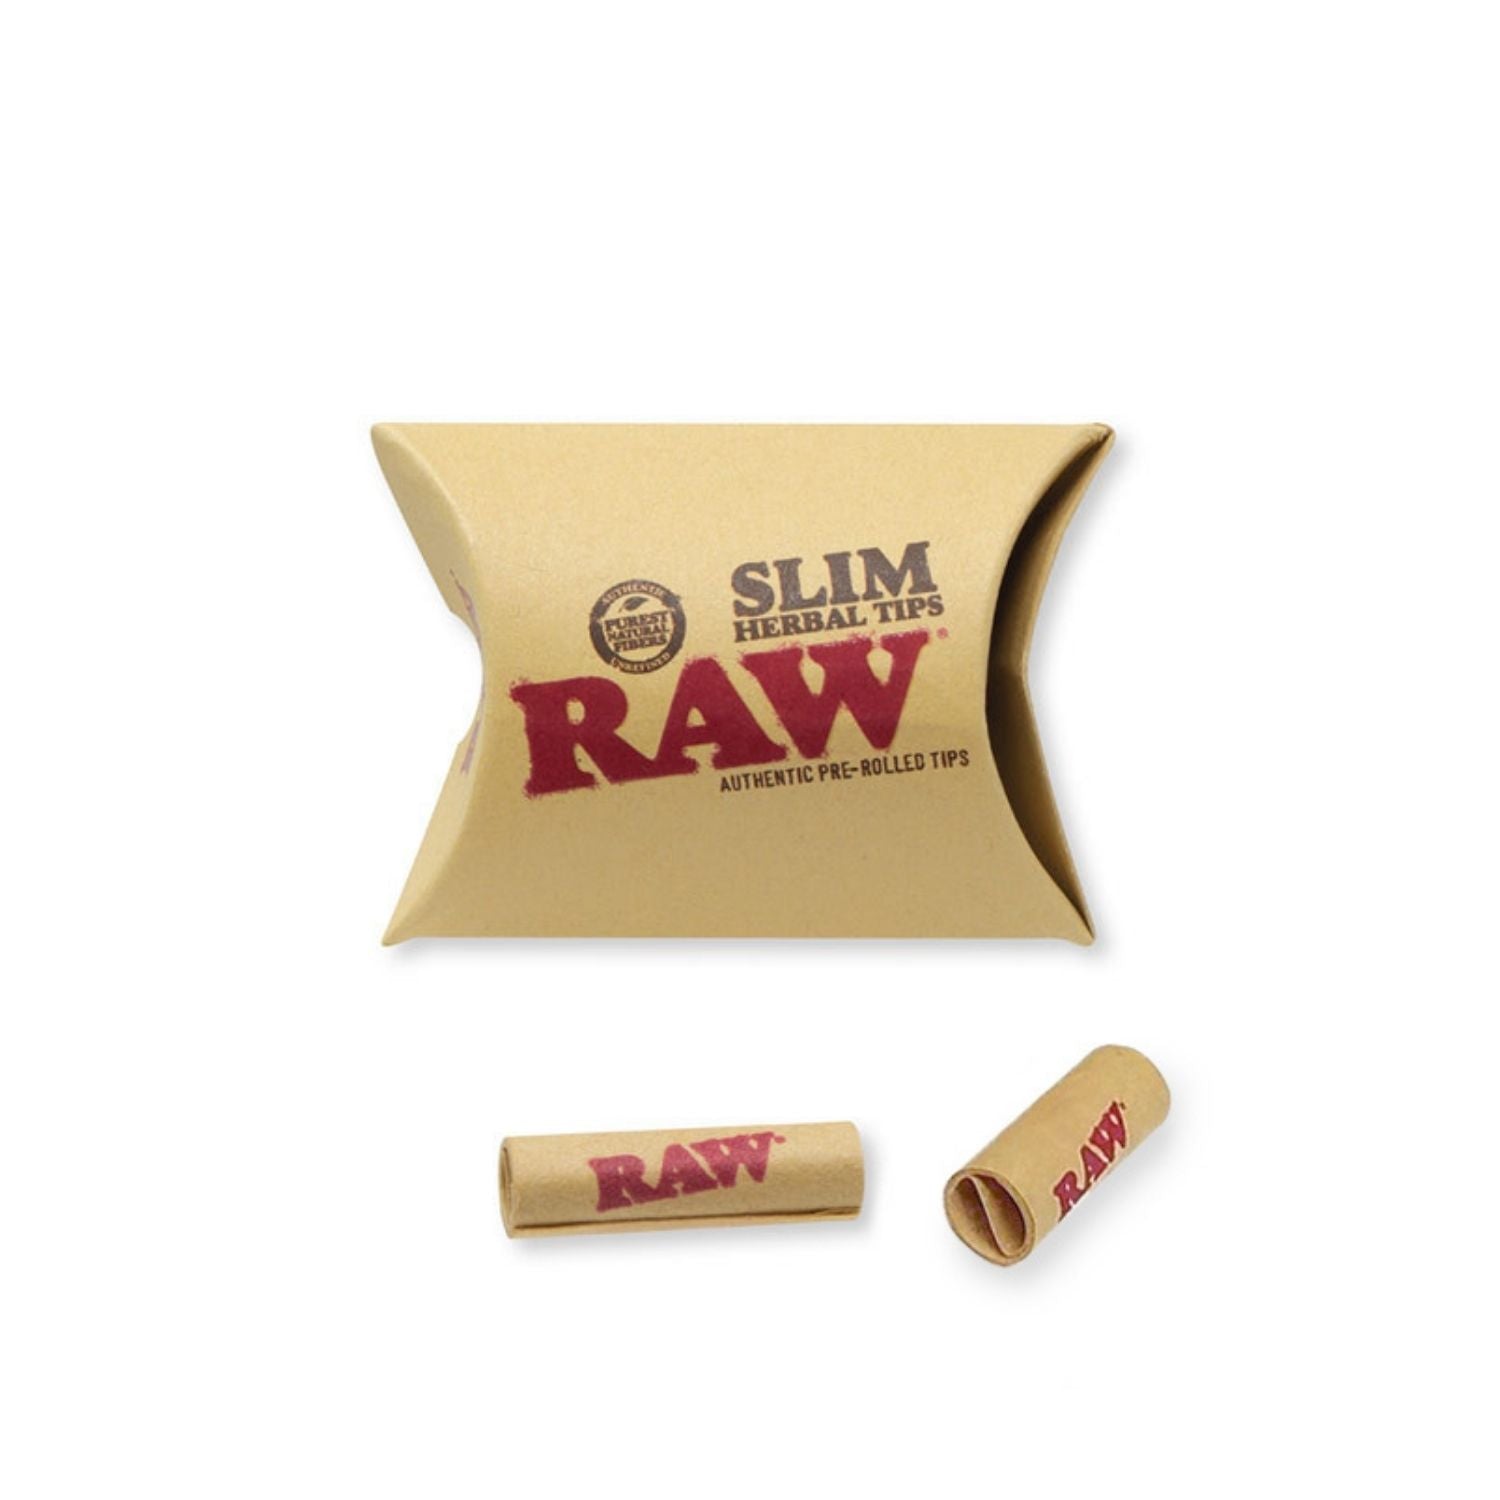 RAW Prerolled Slim Filter Tips - 21 Tips